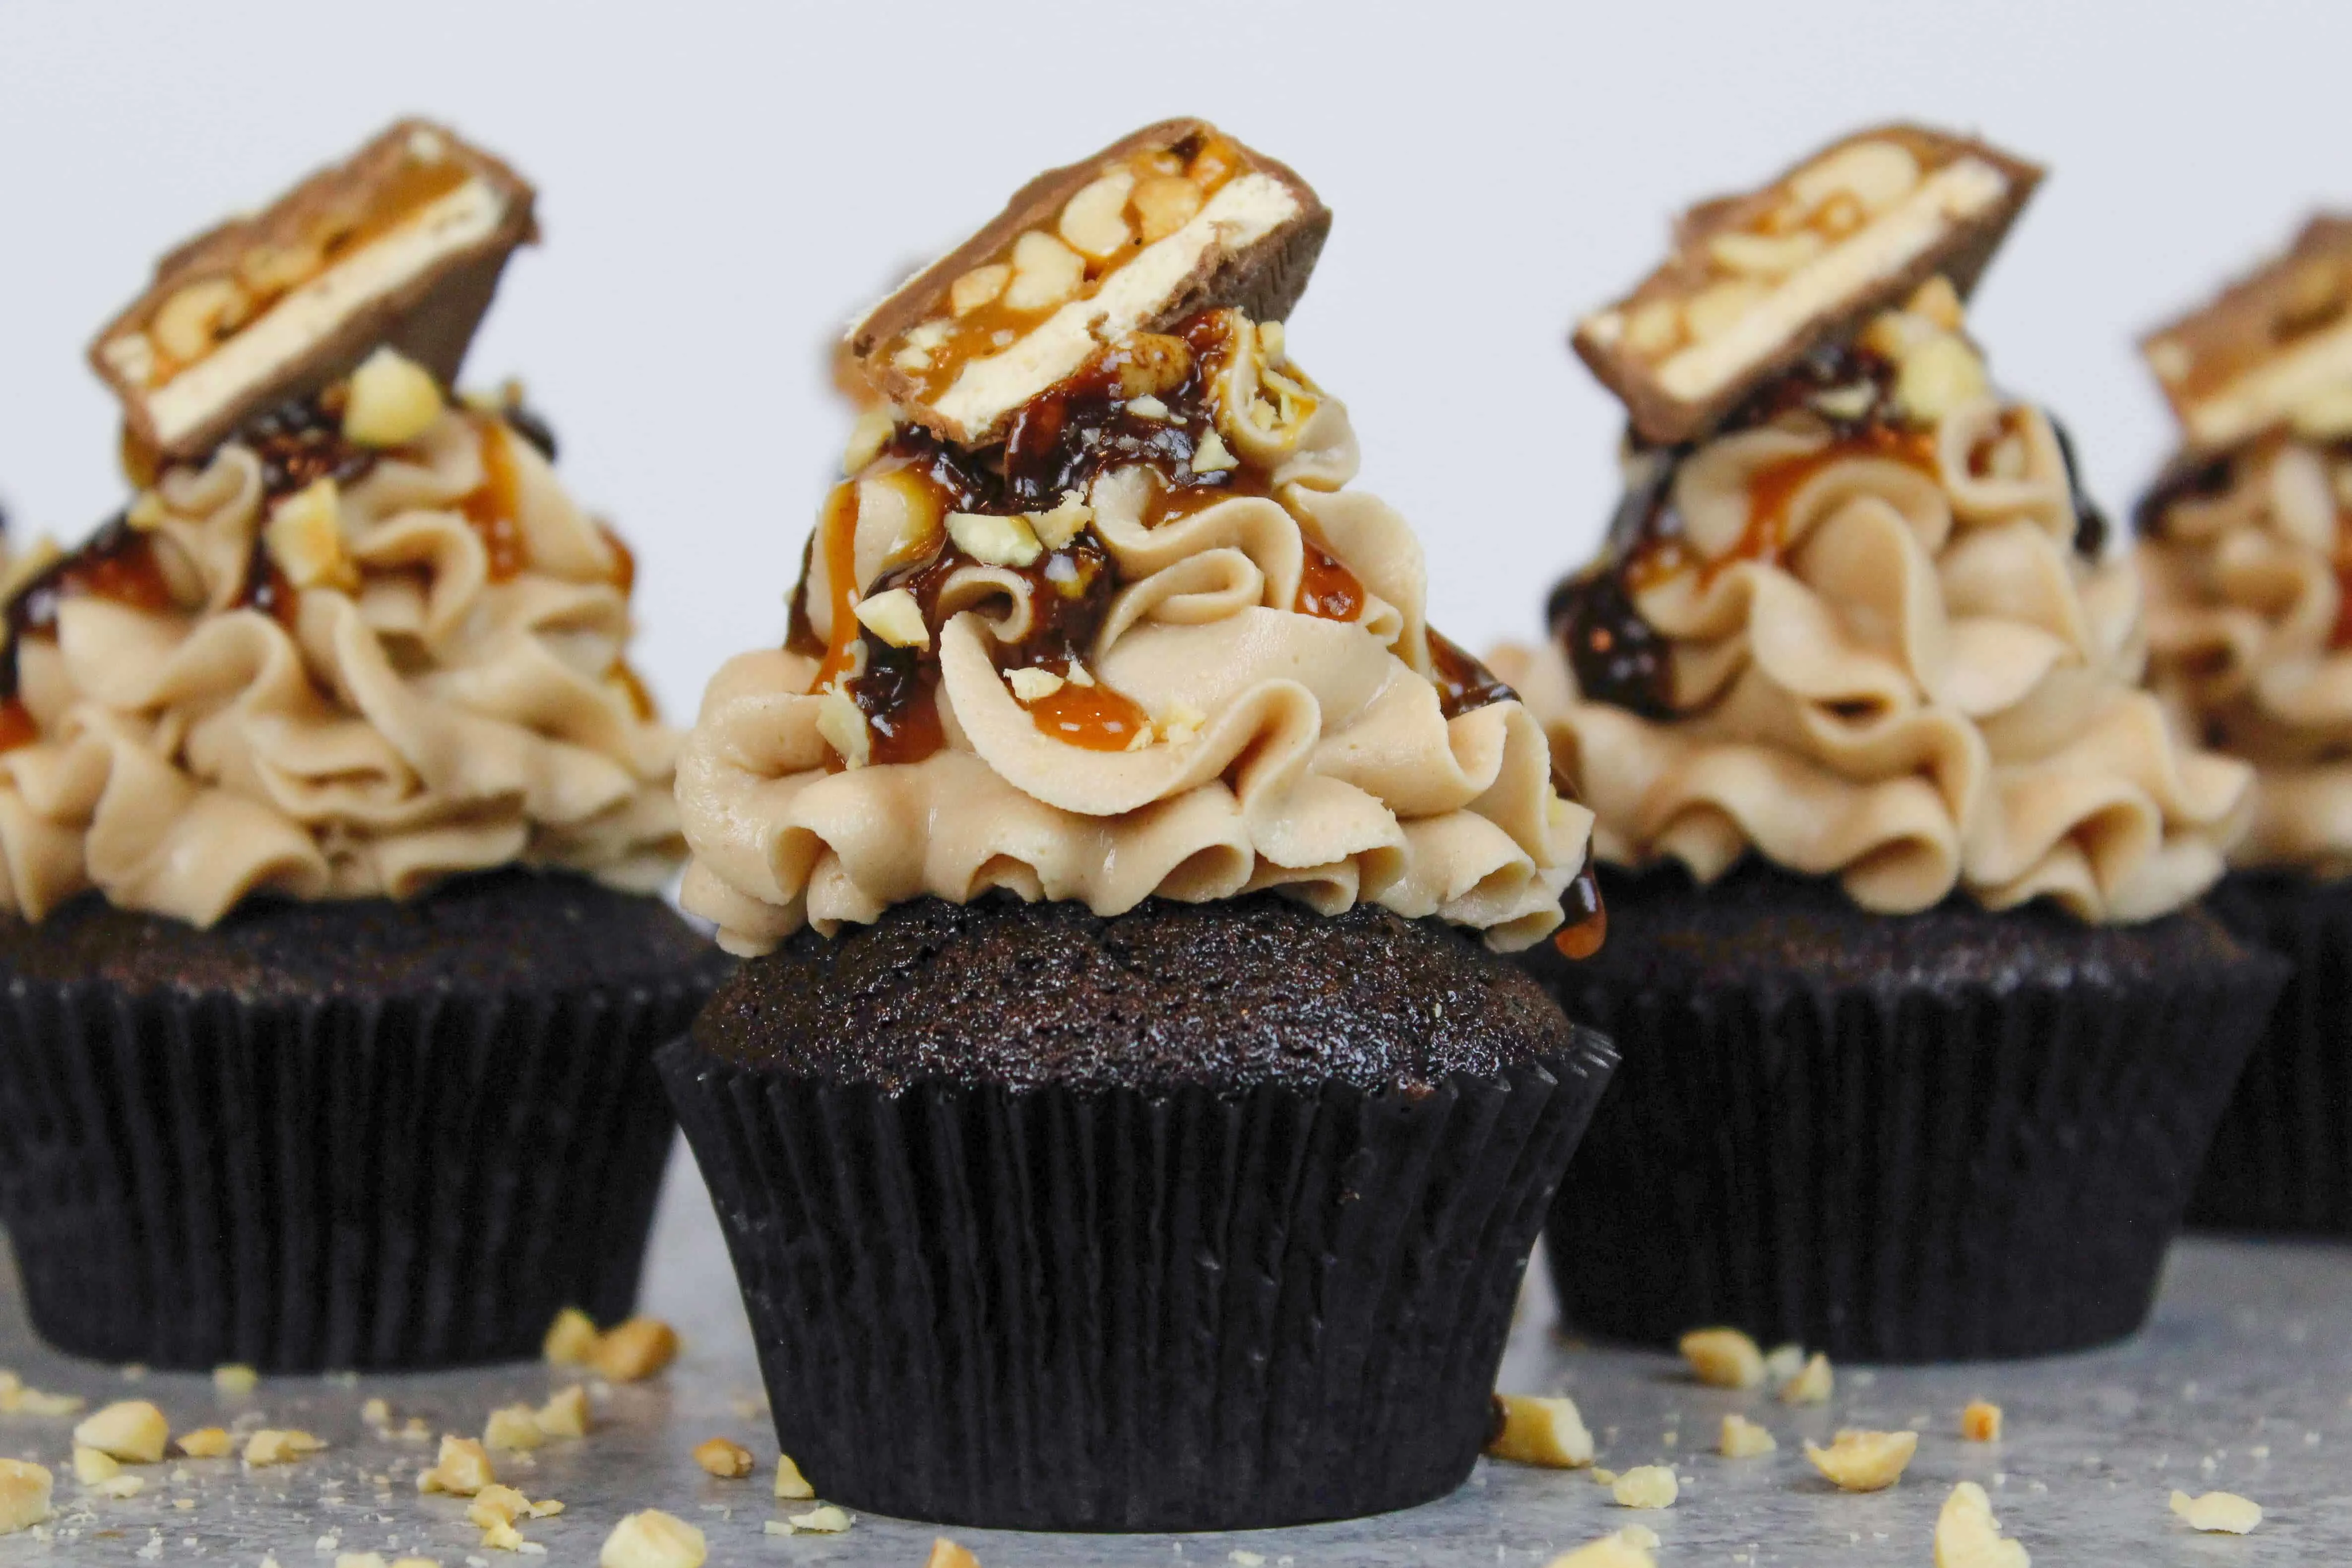 snickers cupcakes, made with chocolate cupcakes, peanut butter frosting, and a caramel and chocolate drizzle!